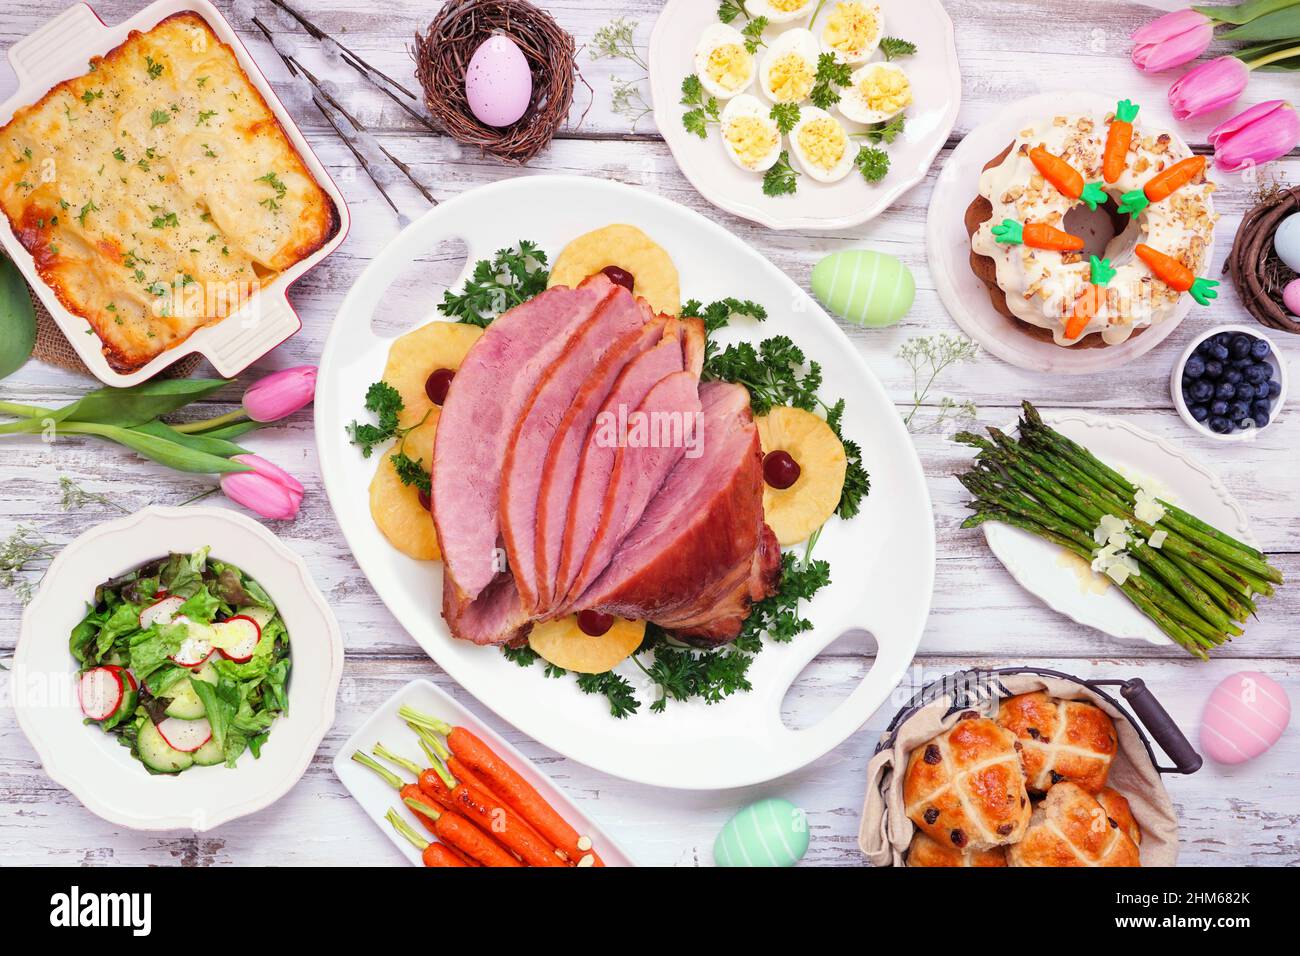 Traditional Easter ham dinner. Top view table scene on a white wood background. Ham, scalloped potatoes, eggs, hot cross buns, carrot cake and vegetab Stock Photo